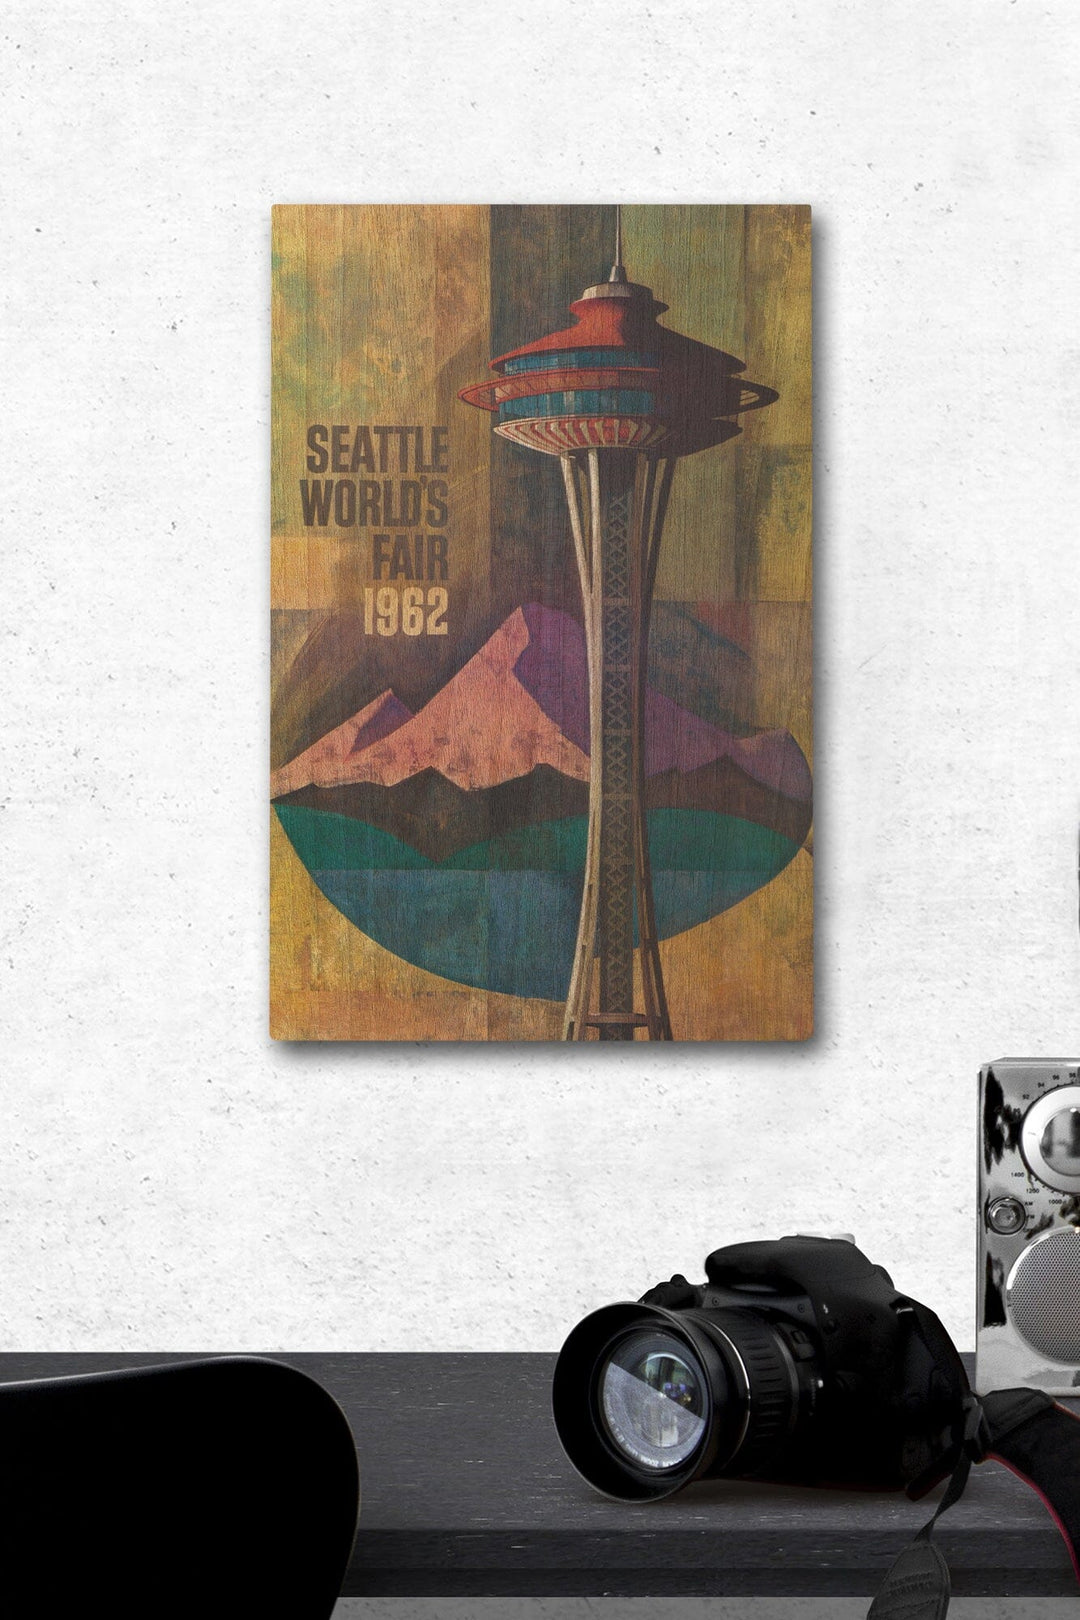 Seattle, Washington, Space Needle World's Fair, Vintage Travel Poster, Wood Signs and Postcards Wood Lantern Press 12 x 18 Wood Gallery Print 